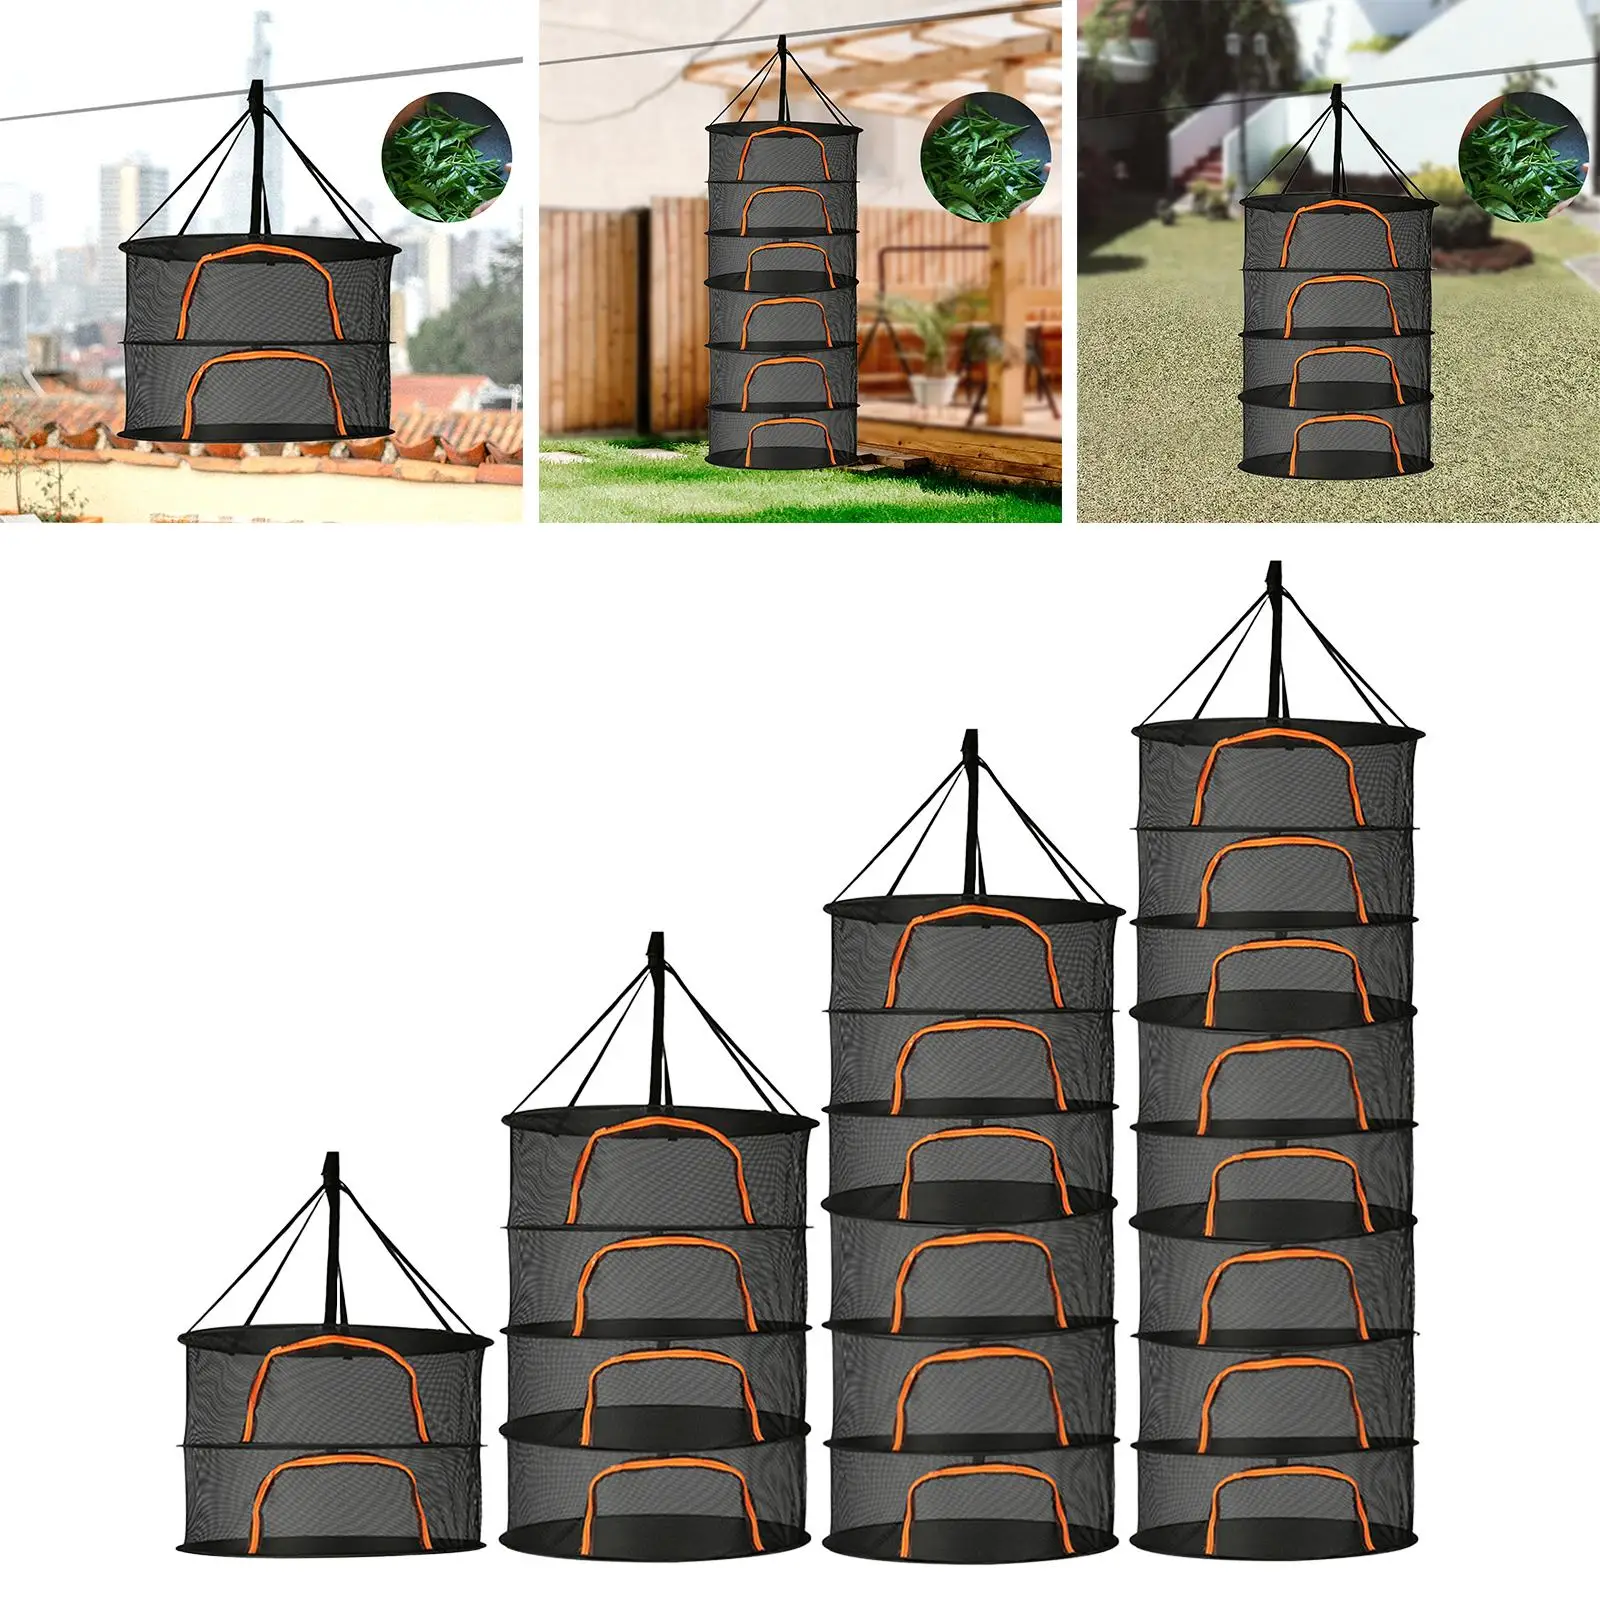 Plants Drying Rack Foldable Mesh Hanging Plant Dryer Hanging Drying Fish Net for Tea, Dolls, Vegetables, Meat, Fruits